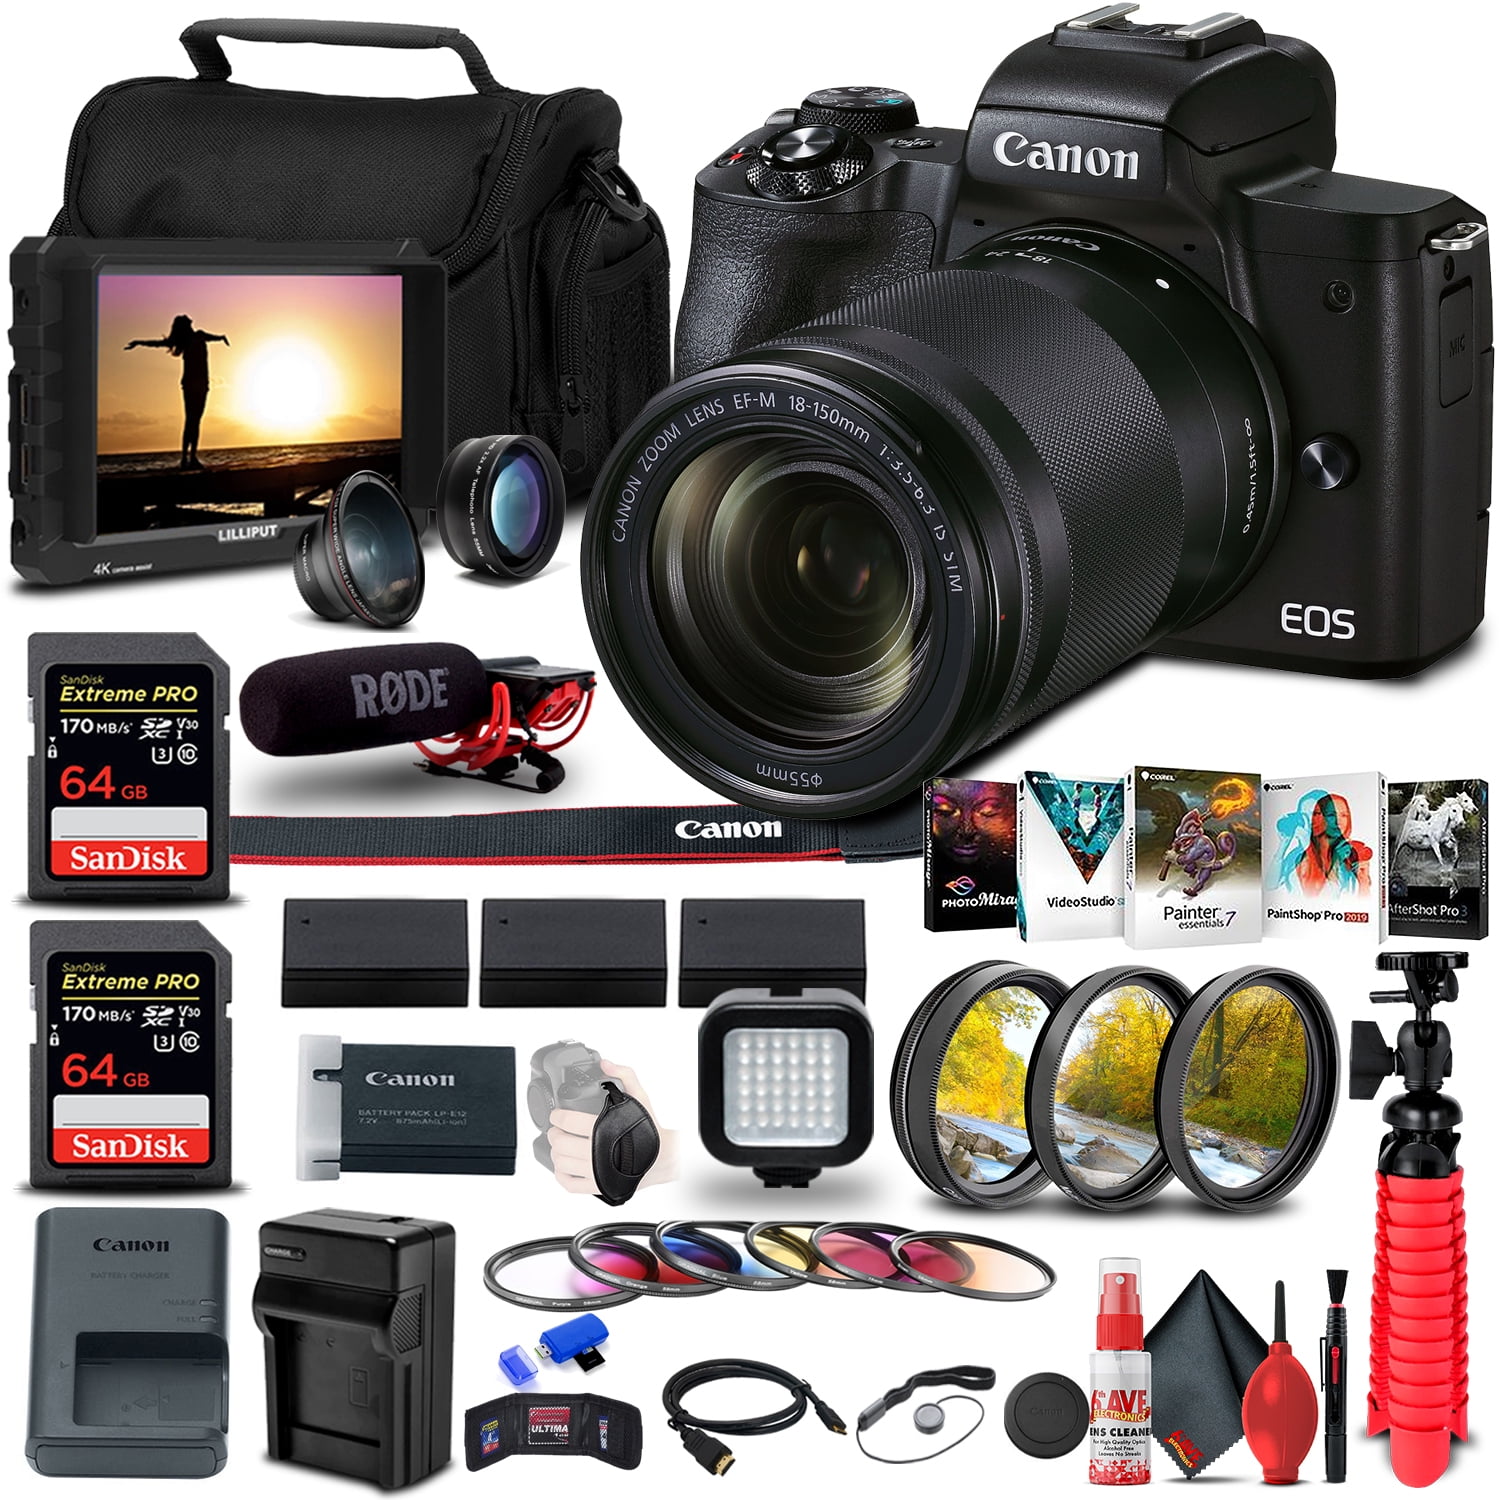 Canon EOS M50 Mark II Mirrorless Camera With EF-M 18-150mm STM Lens (4728C001) + 4K Monitor + Rode VideoMic + 2 x 64GB Memory Card + Color Filter Kit + Filter